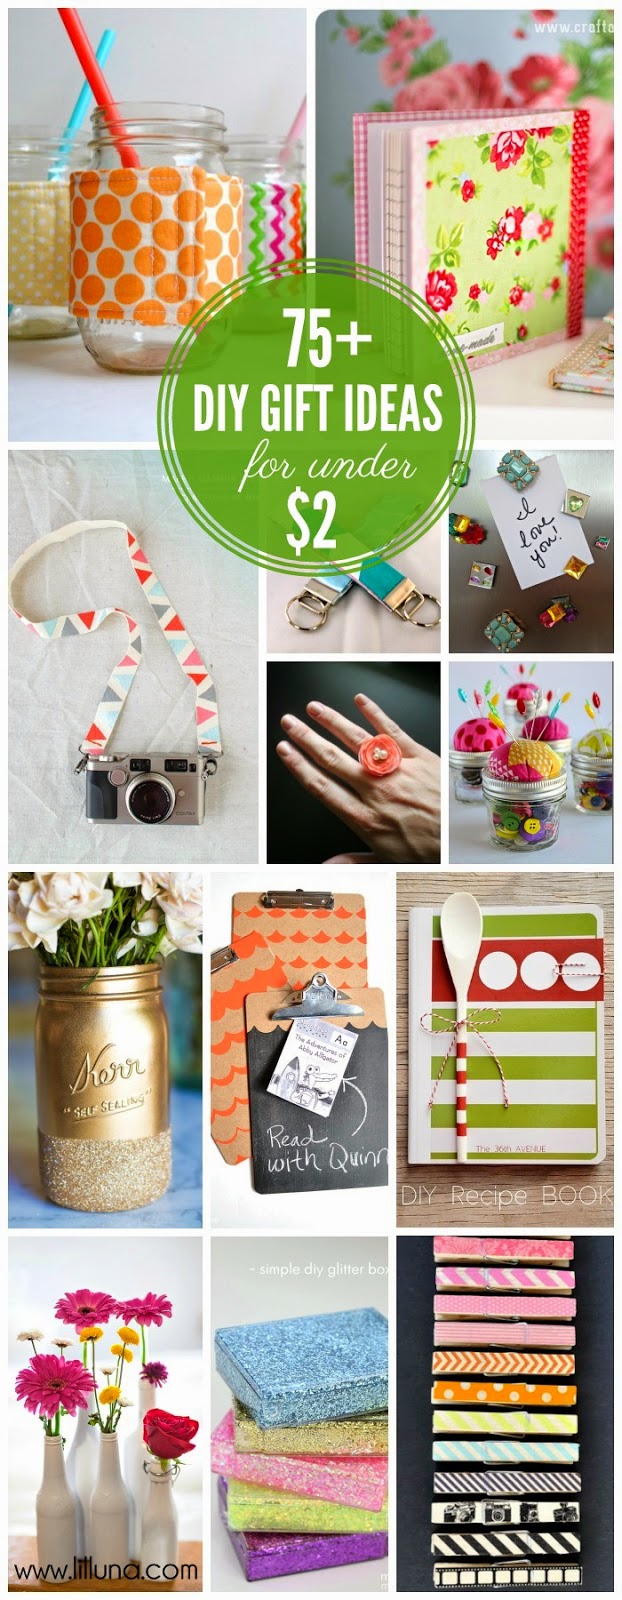 75+ Gift Ideas for Under $2